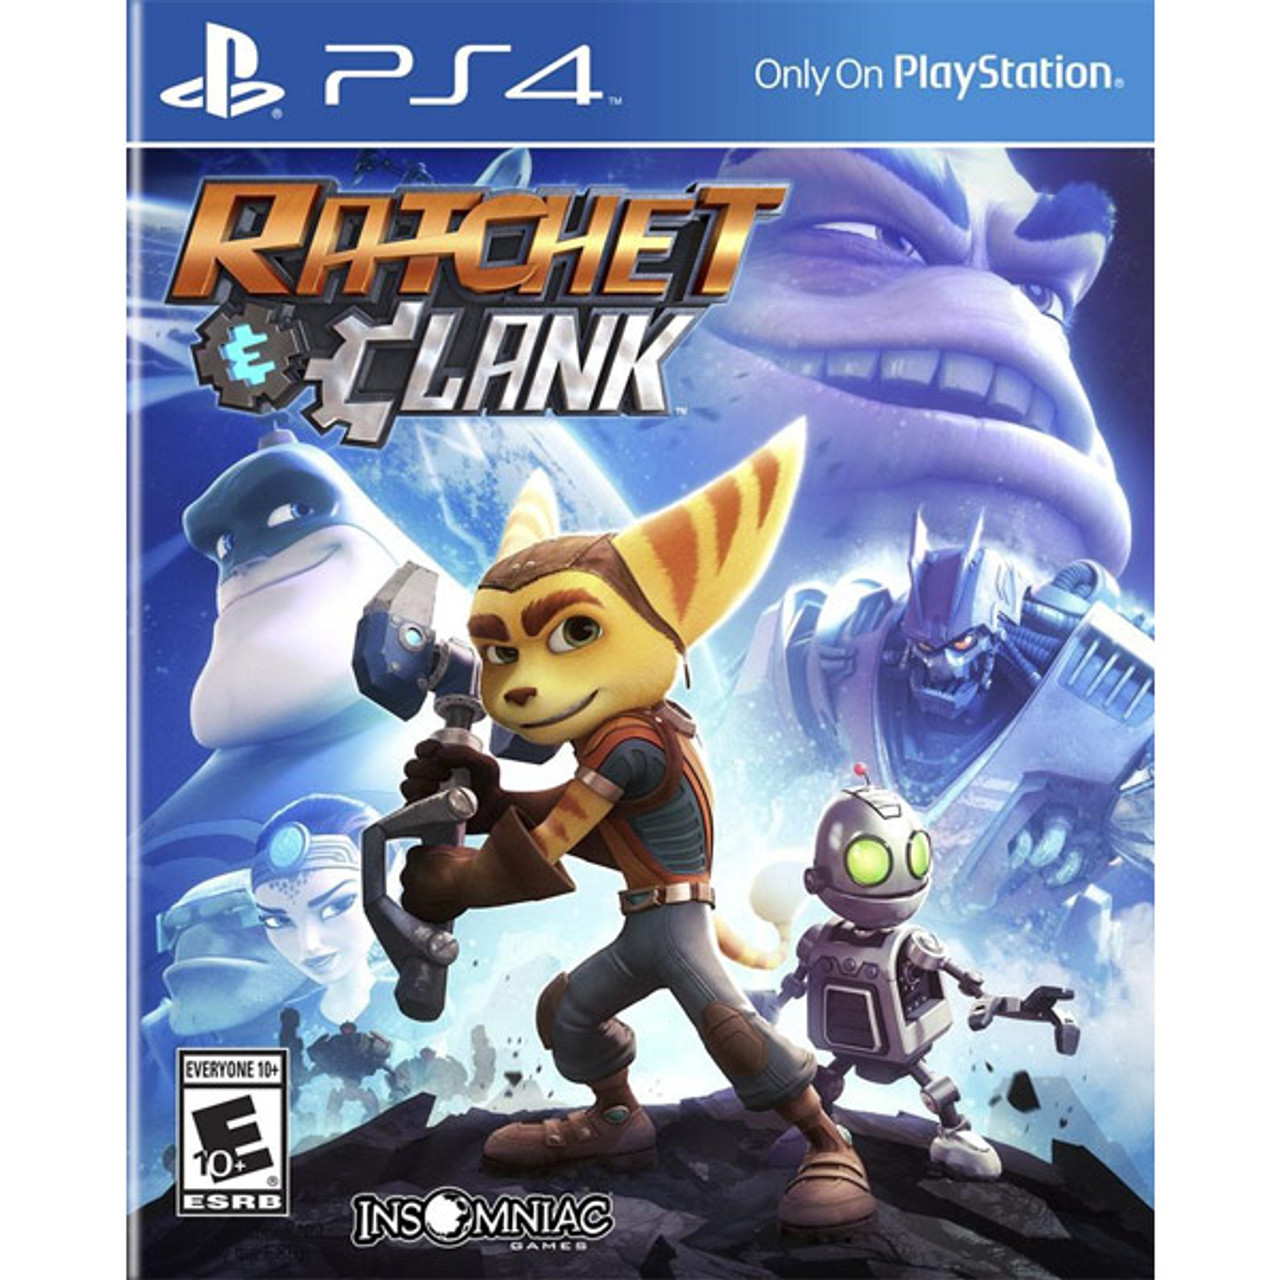 Ratchet & Clank Playstation 4 For